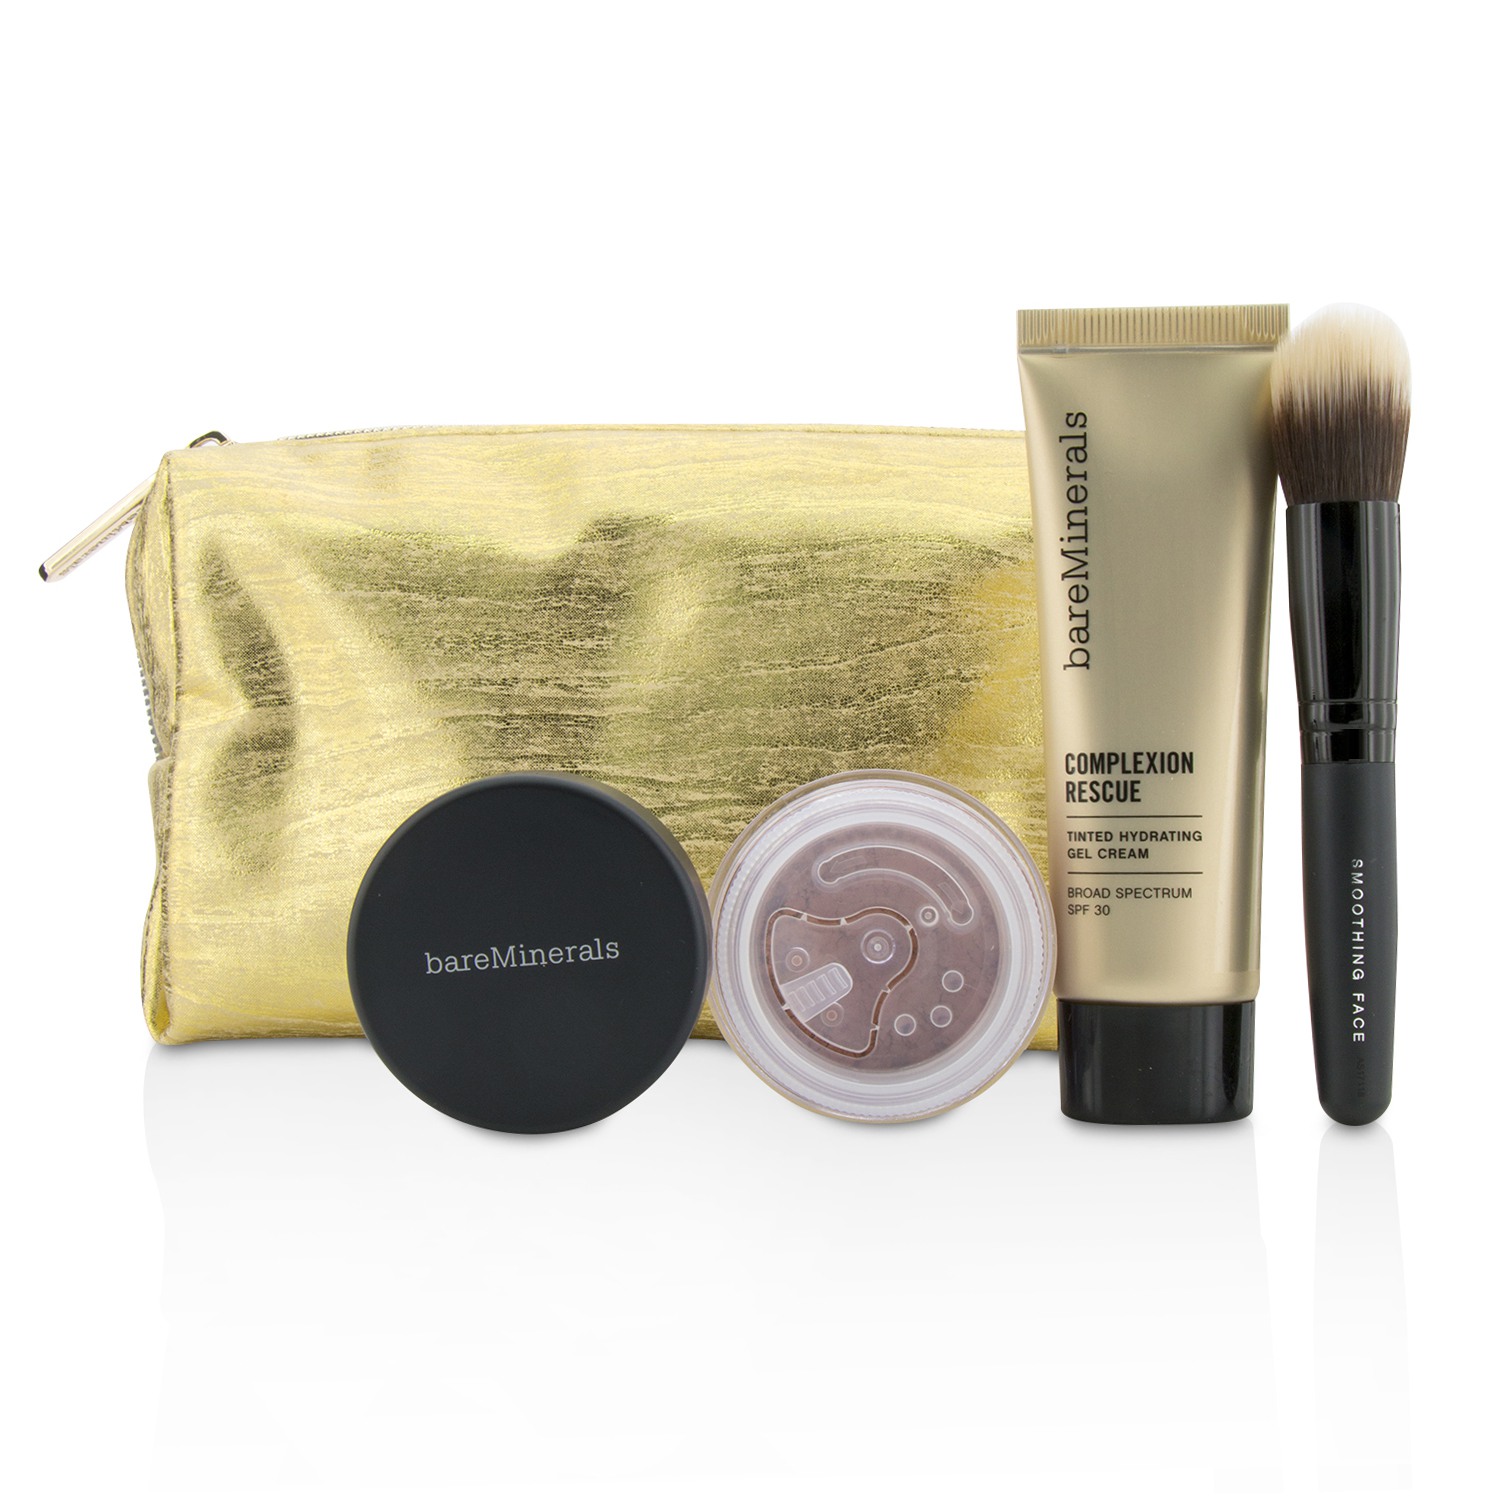 Take Me With You Complexion Rescue Try Me Set - # 07 Tan BareMinerals Image